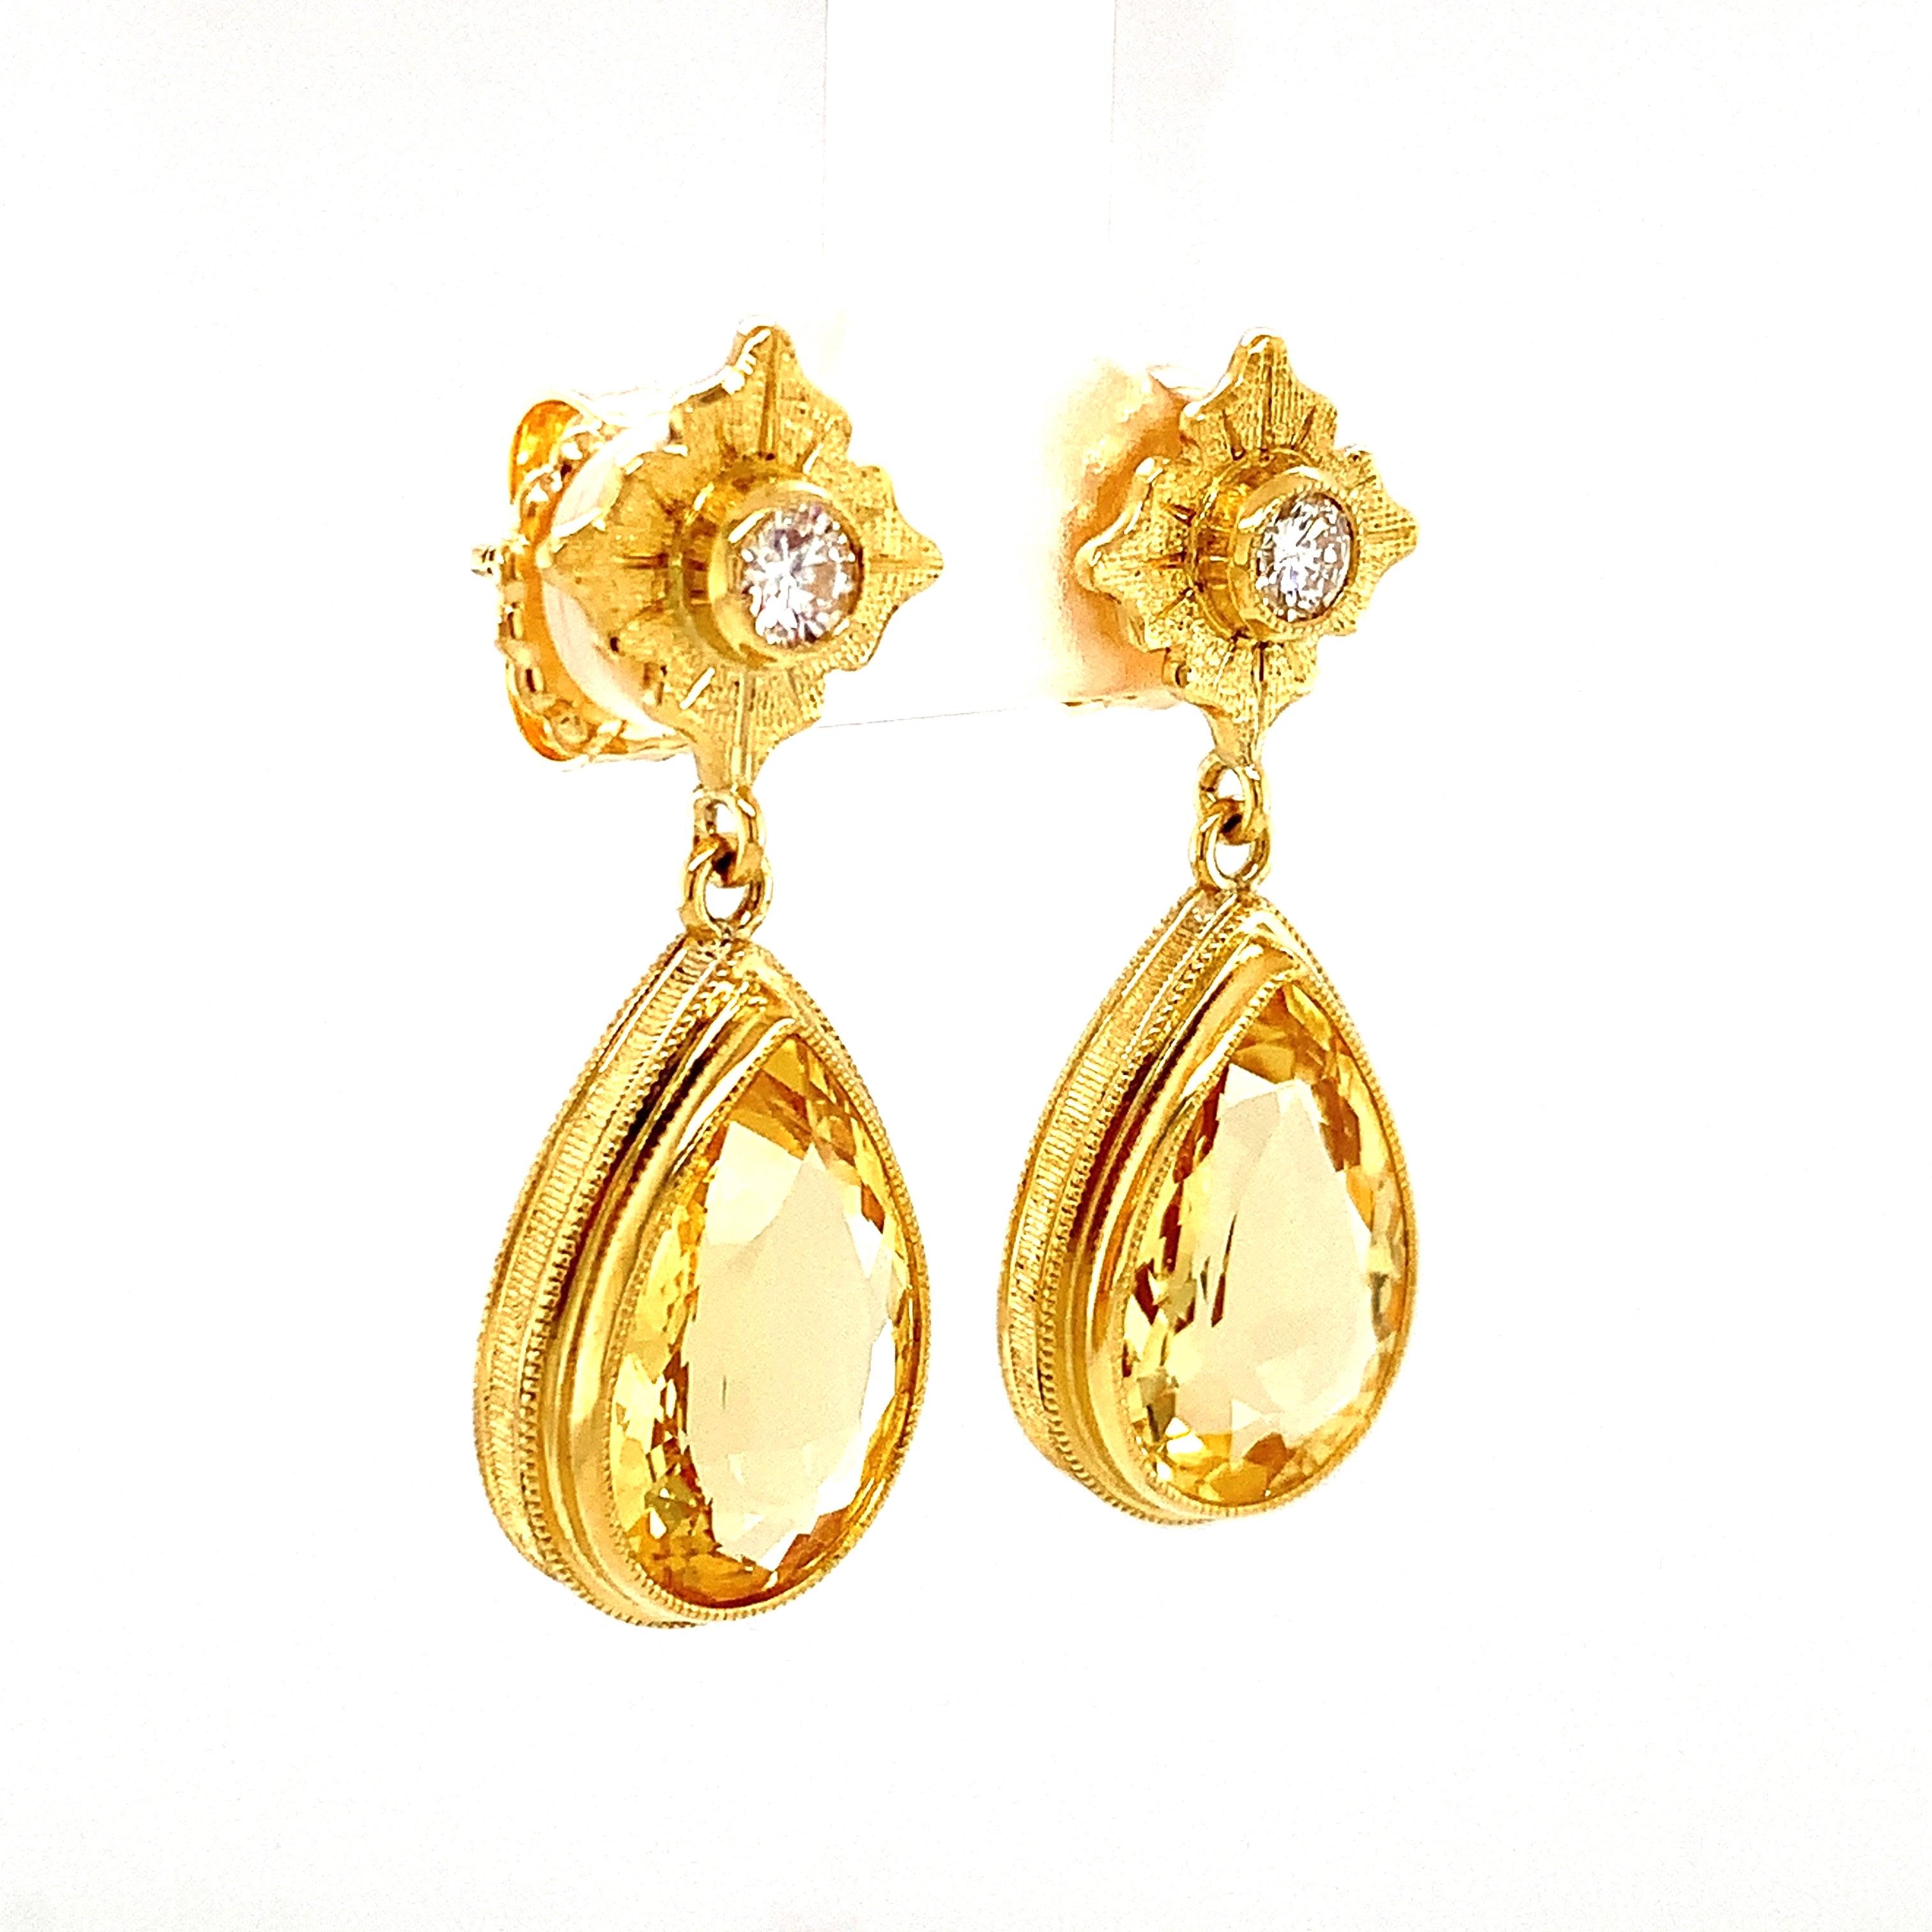 These golden beryl drop earrings are sophisticated and fun! They feature two beautifully matched pear-shaped golden beryls topped with brilliant white diamonds set in finely crafted 18k yellow gold settings. Golden beryls are cousins to emeralds and